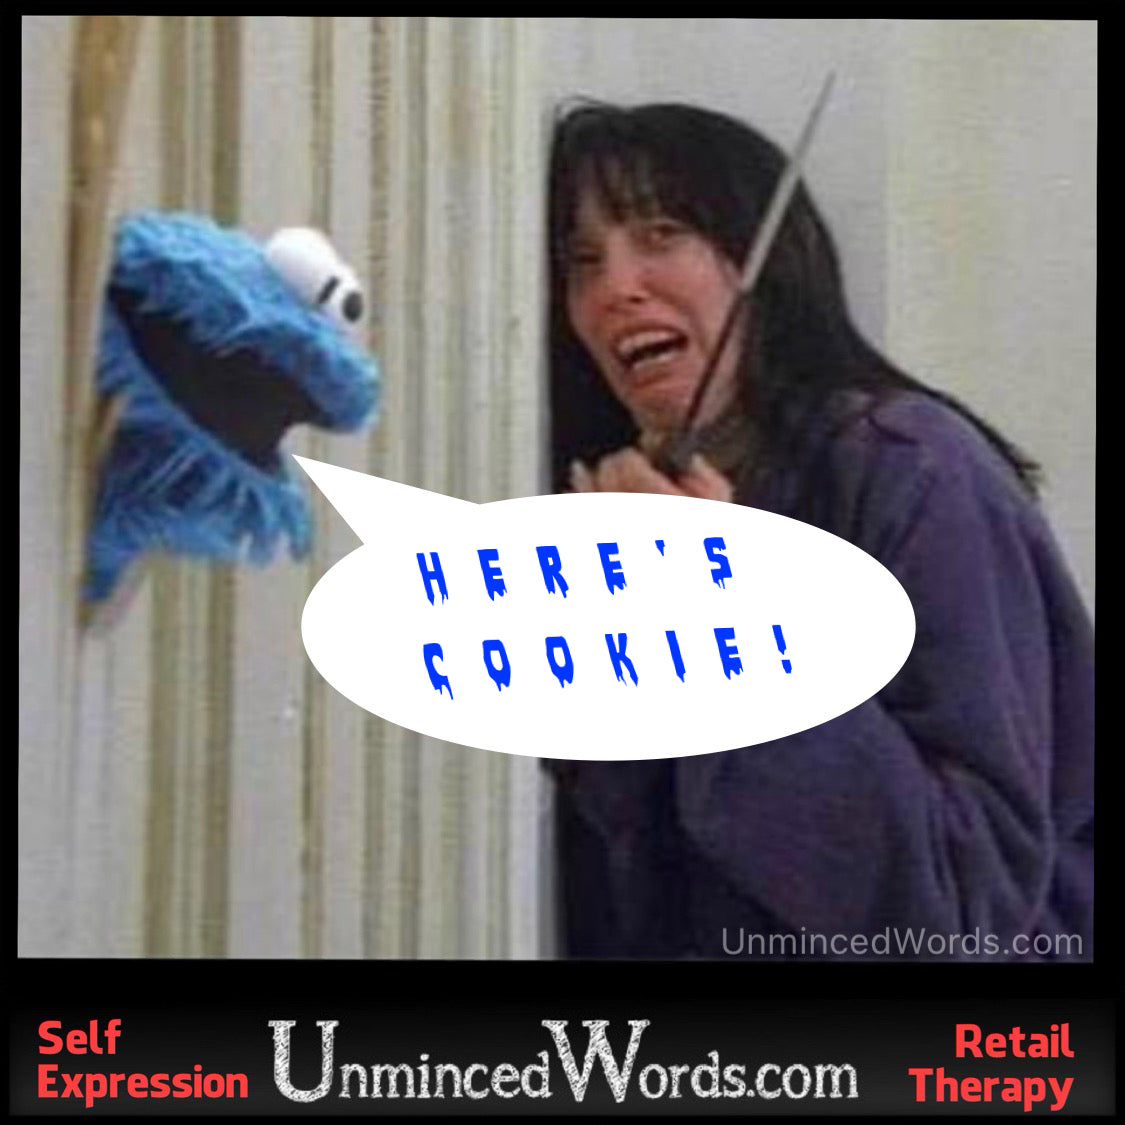 Here’s Cookie, The Shining meme is your mood